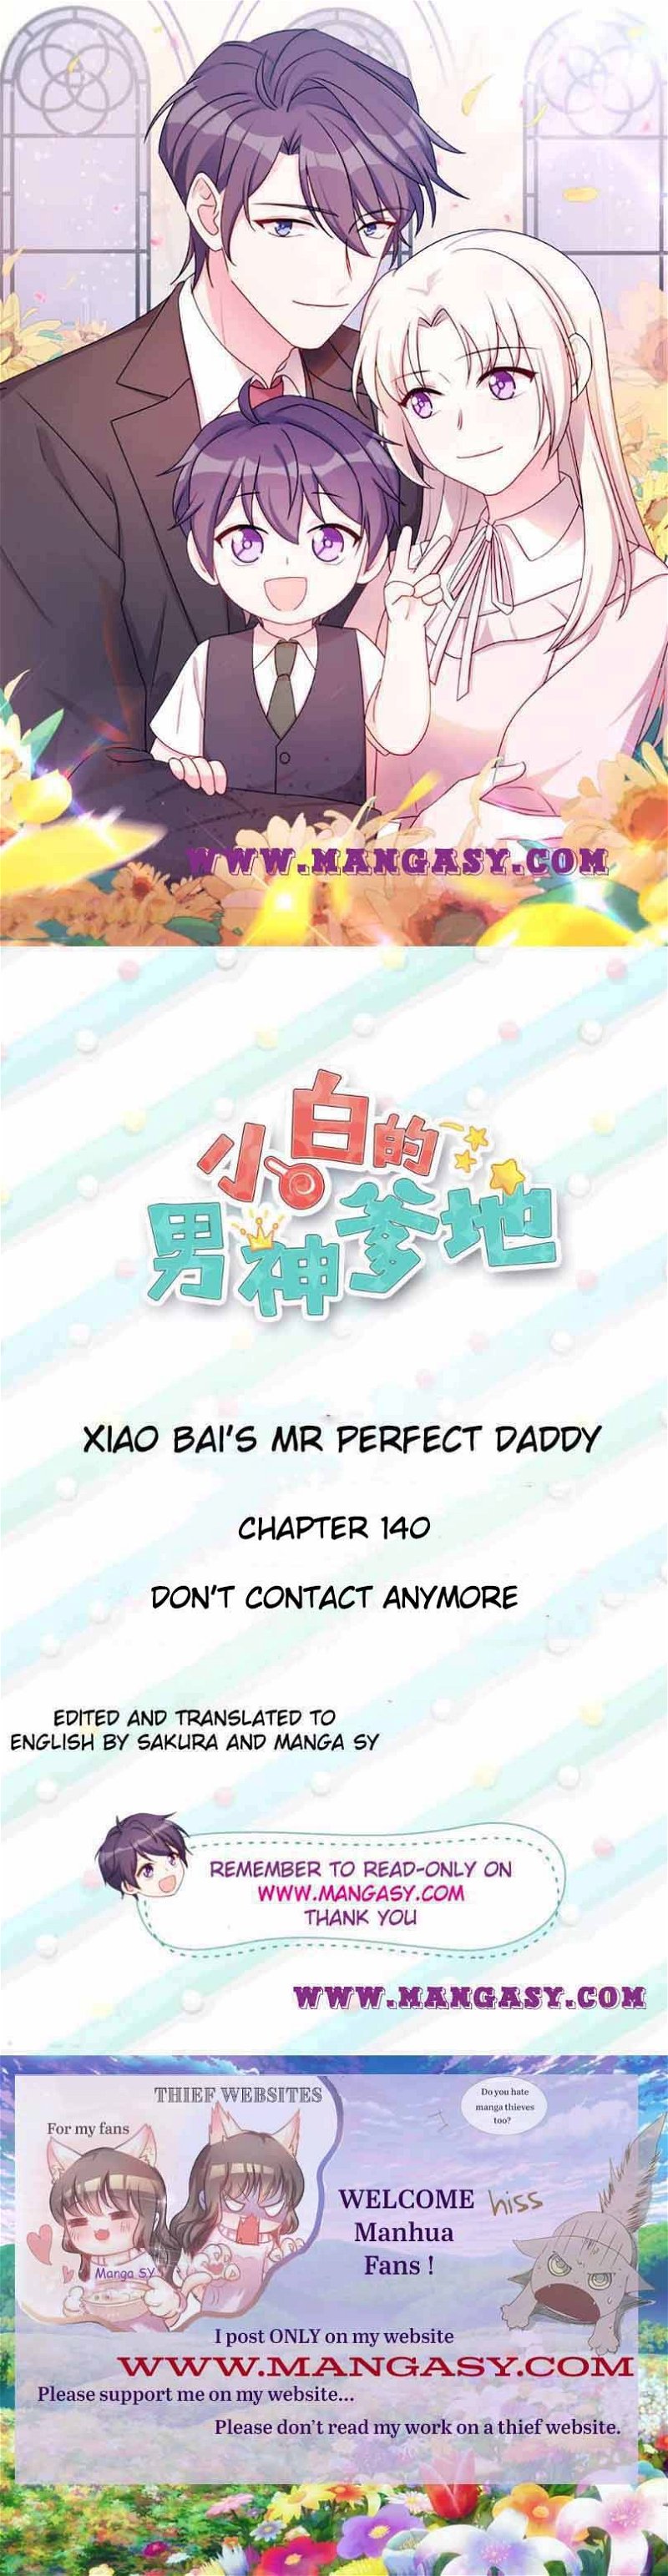 Xiao Bai’s father is a wonderful person Chapter 140 - Page 0